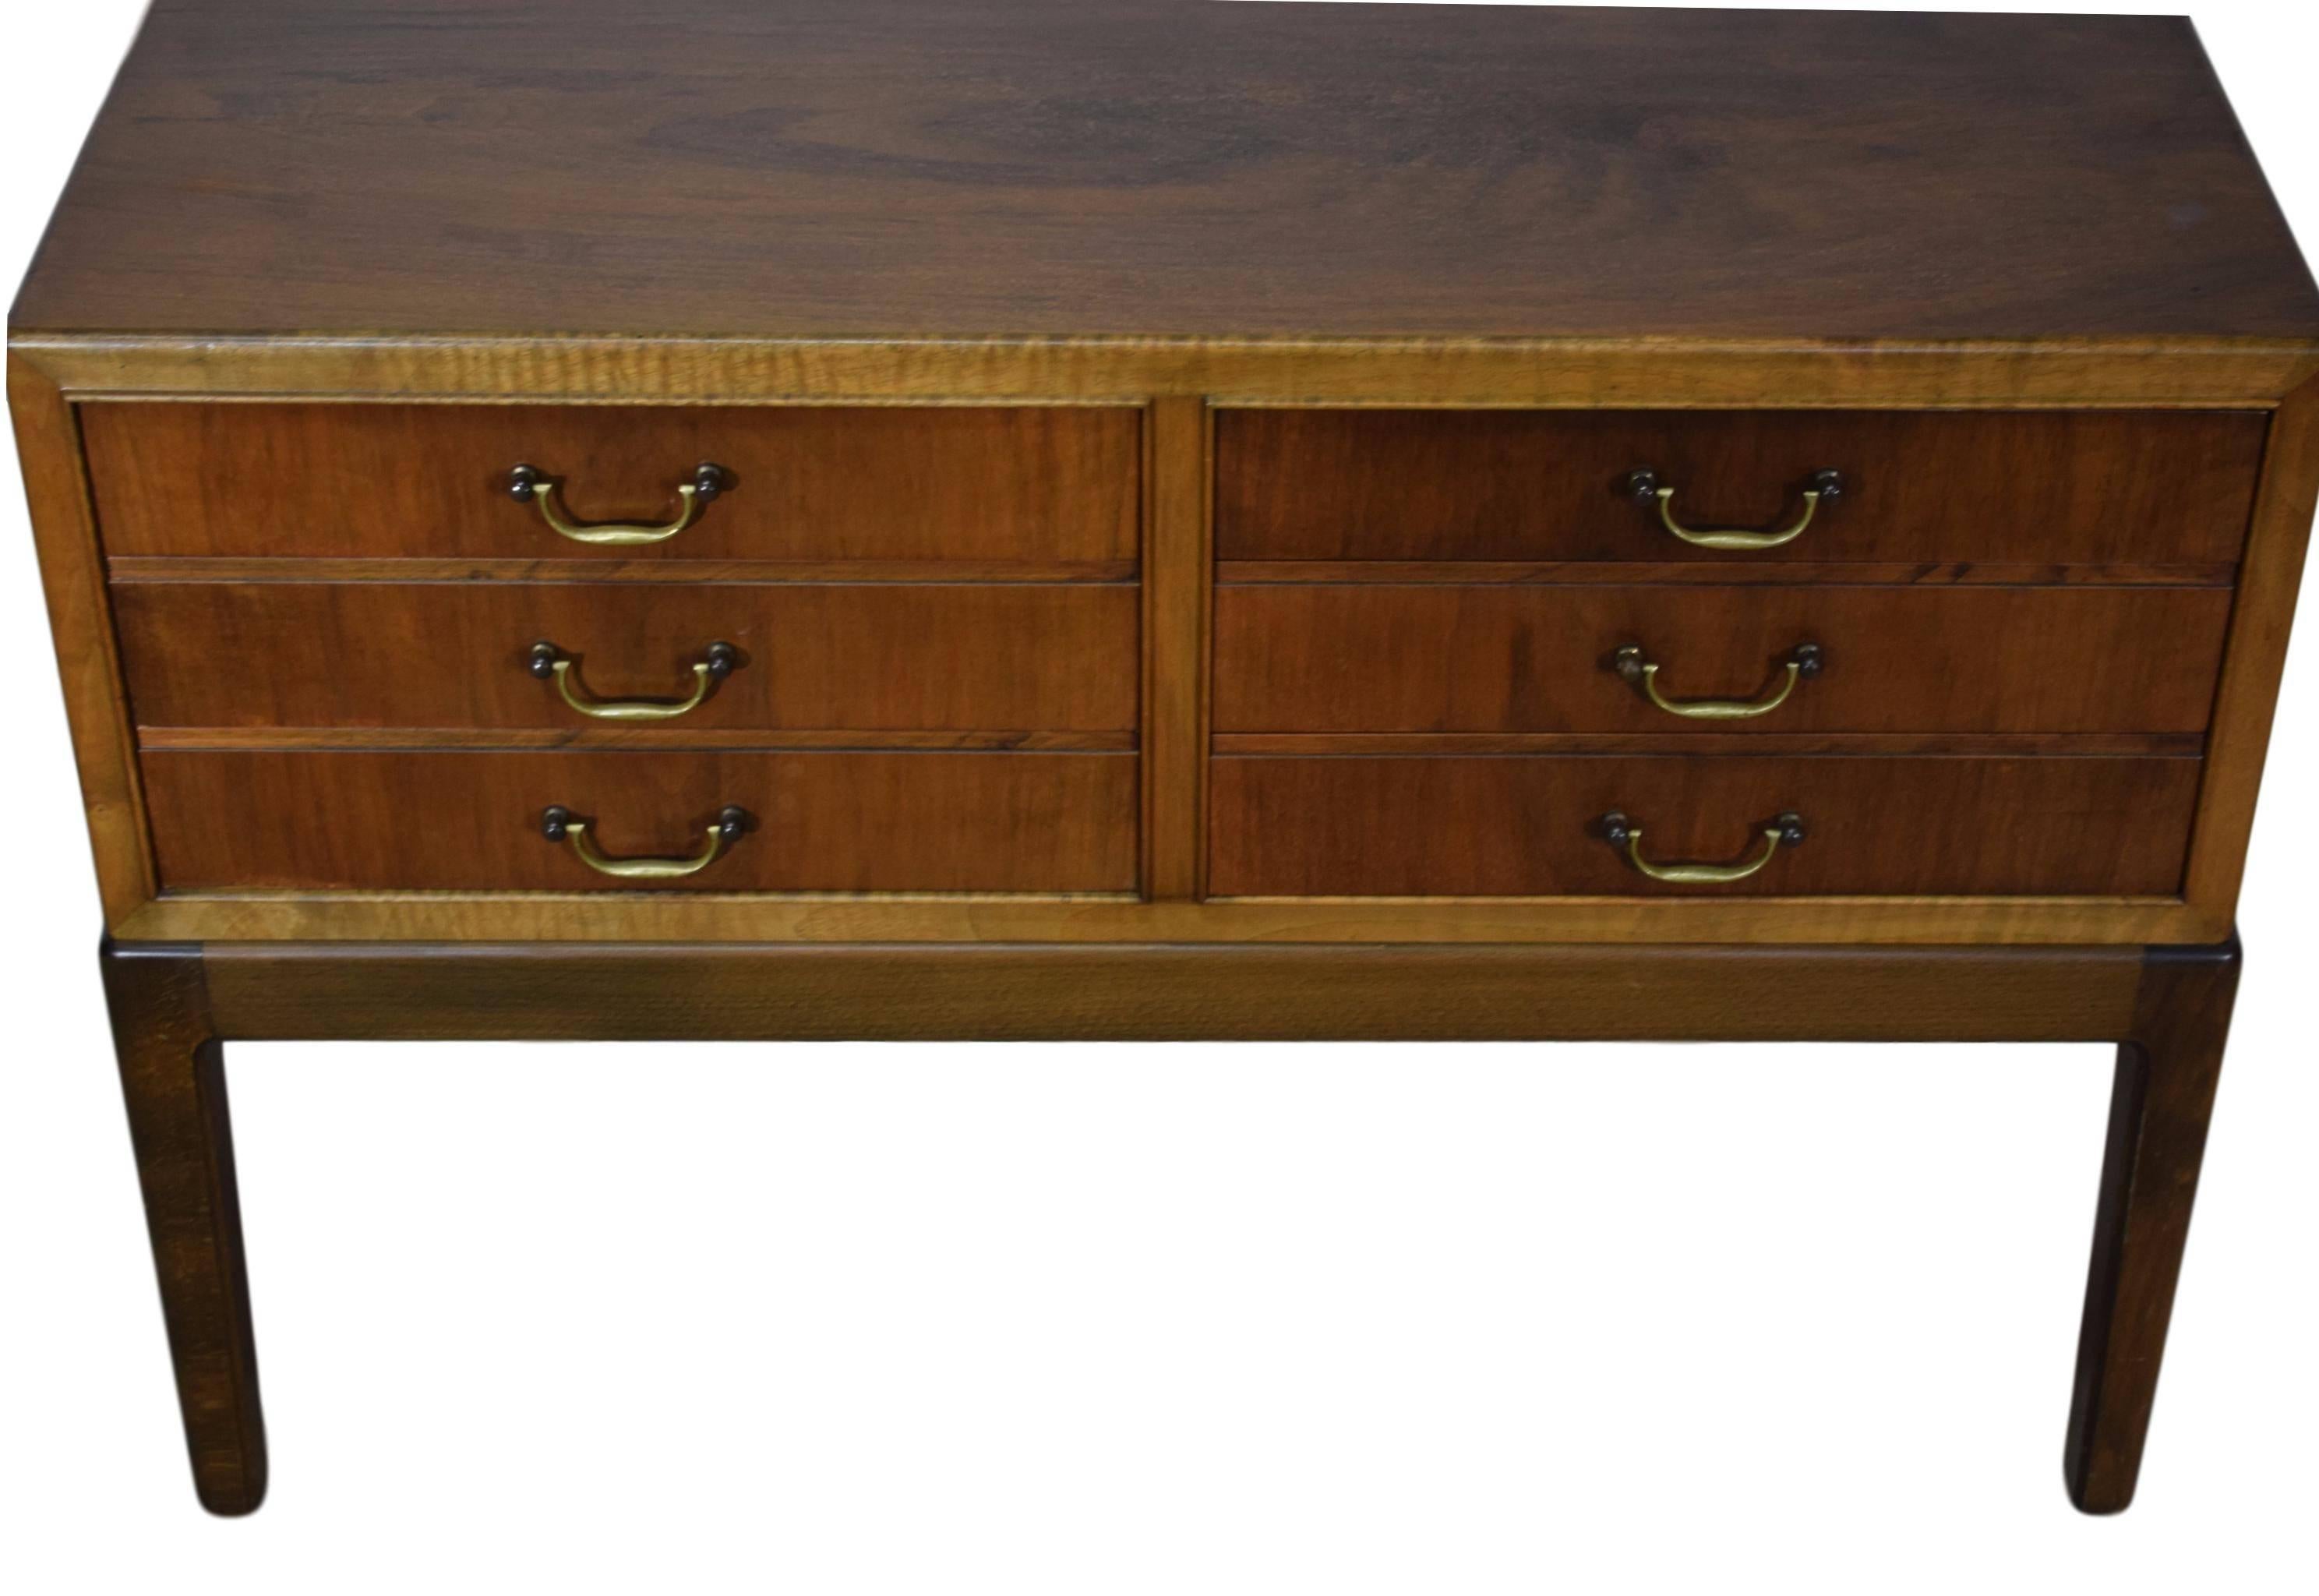 An early Danish midcentury walnut dresser with brass handles by Ole Wanscher (1903-1985). Six drawers. Walnut veneer and stained beech frame.

 